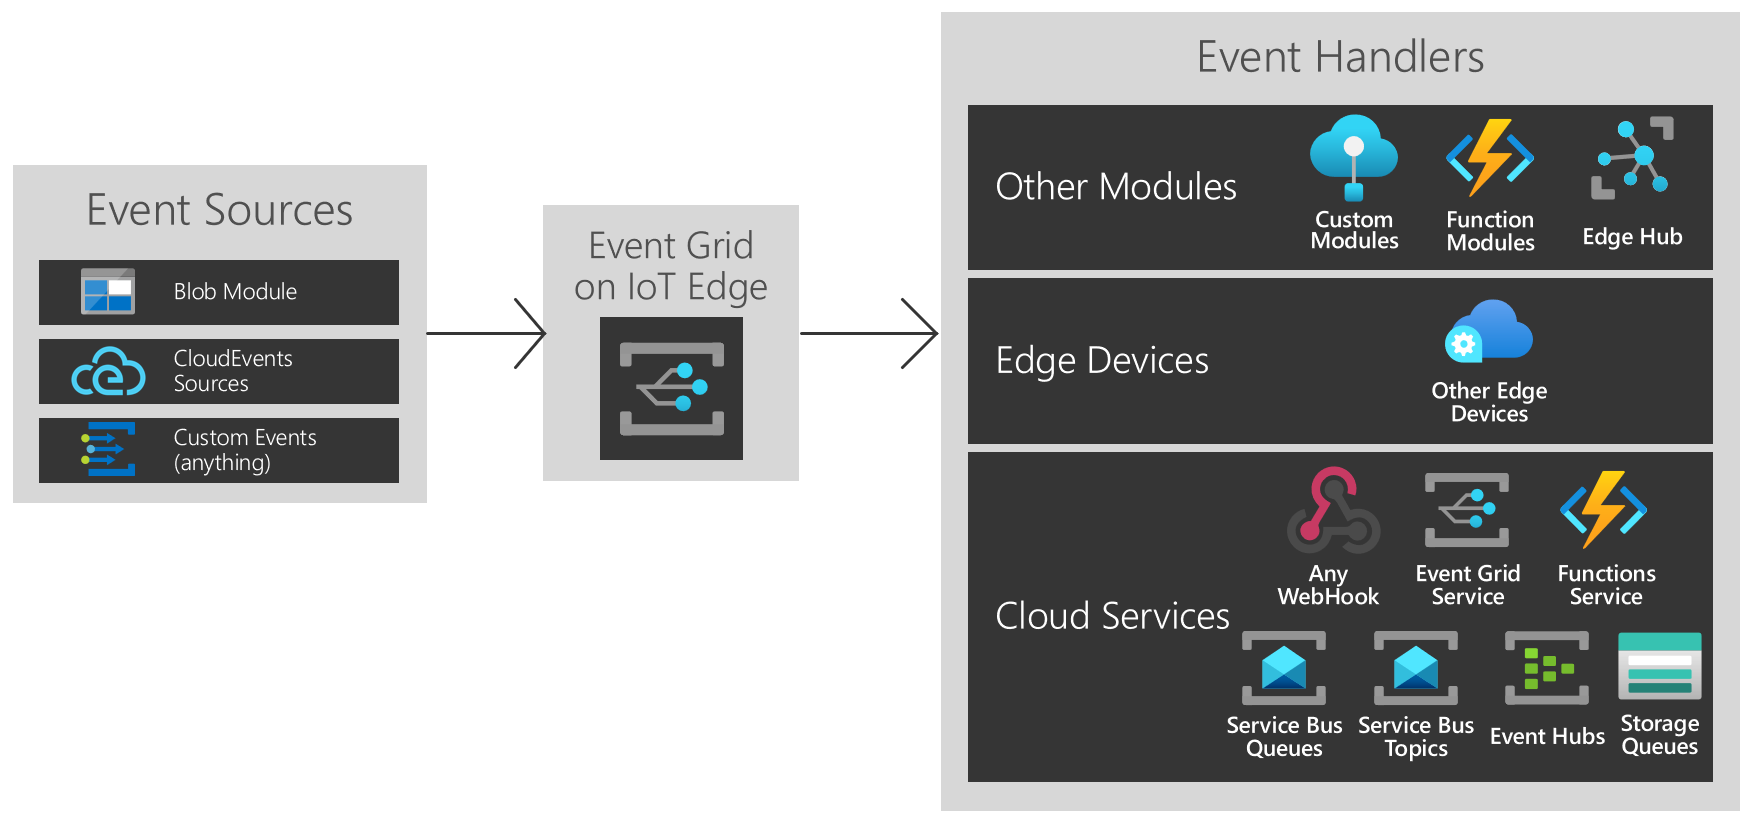 Event Grid on IoT Edge model of sources and handlers